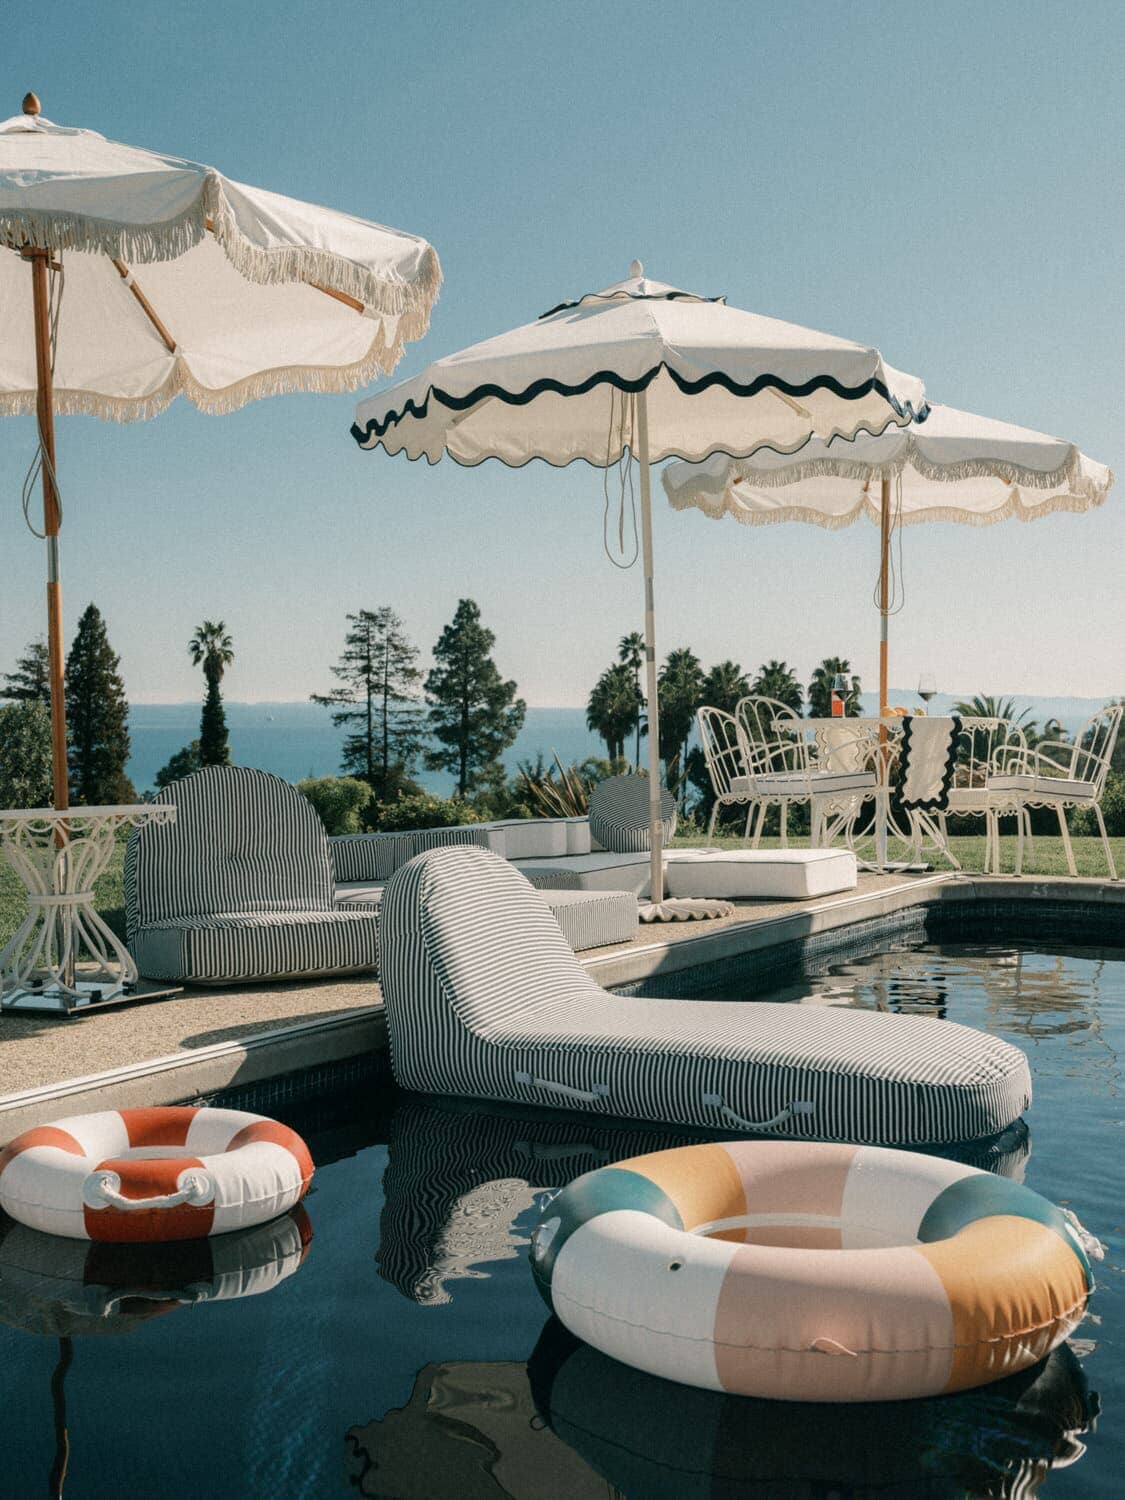 pool floats in a pool